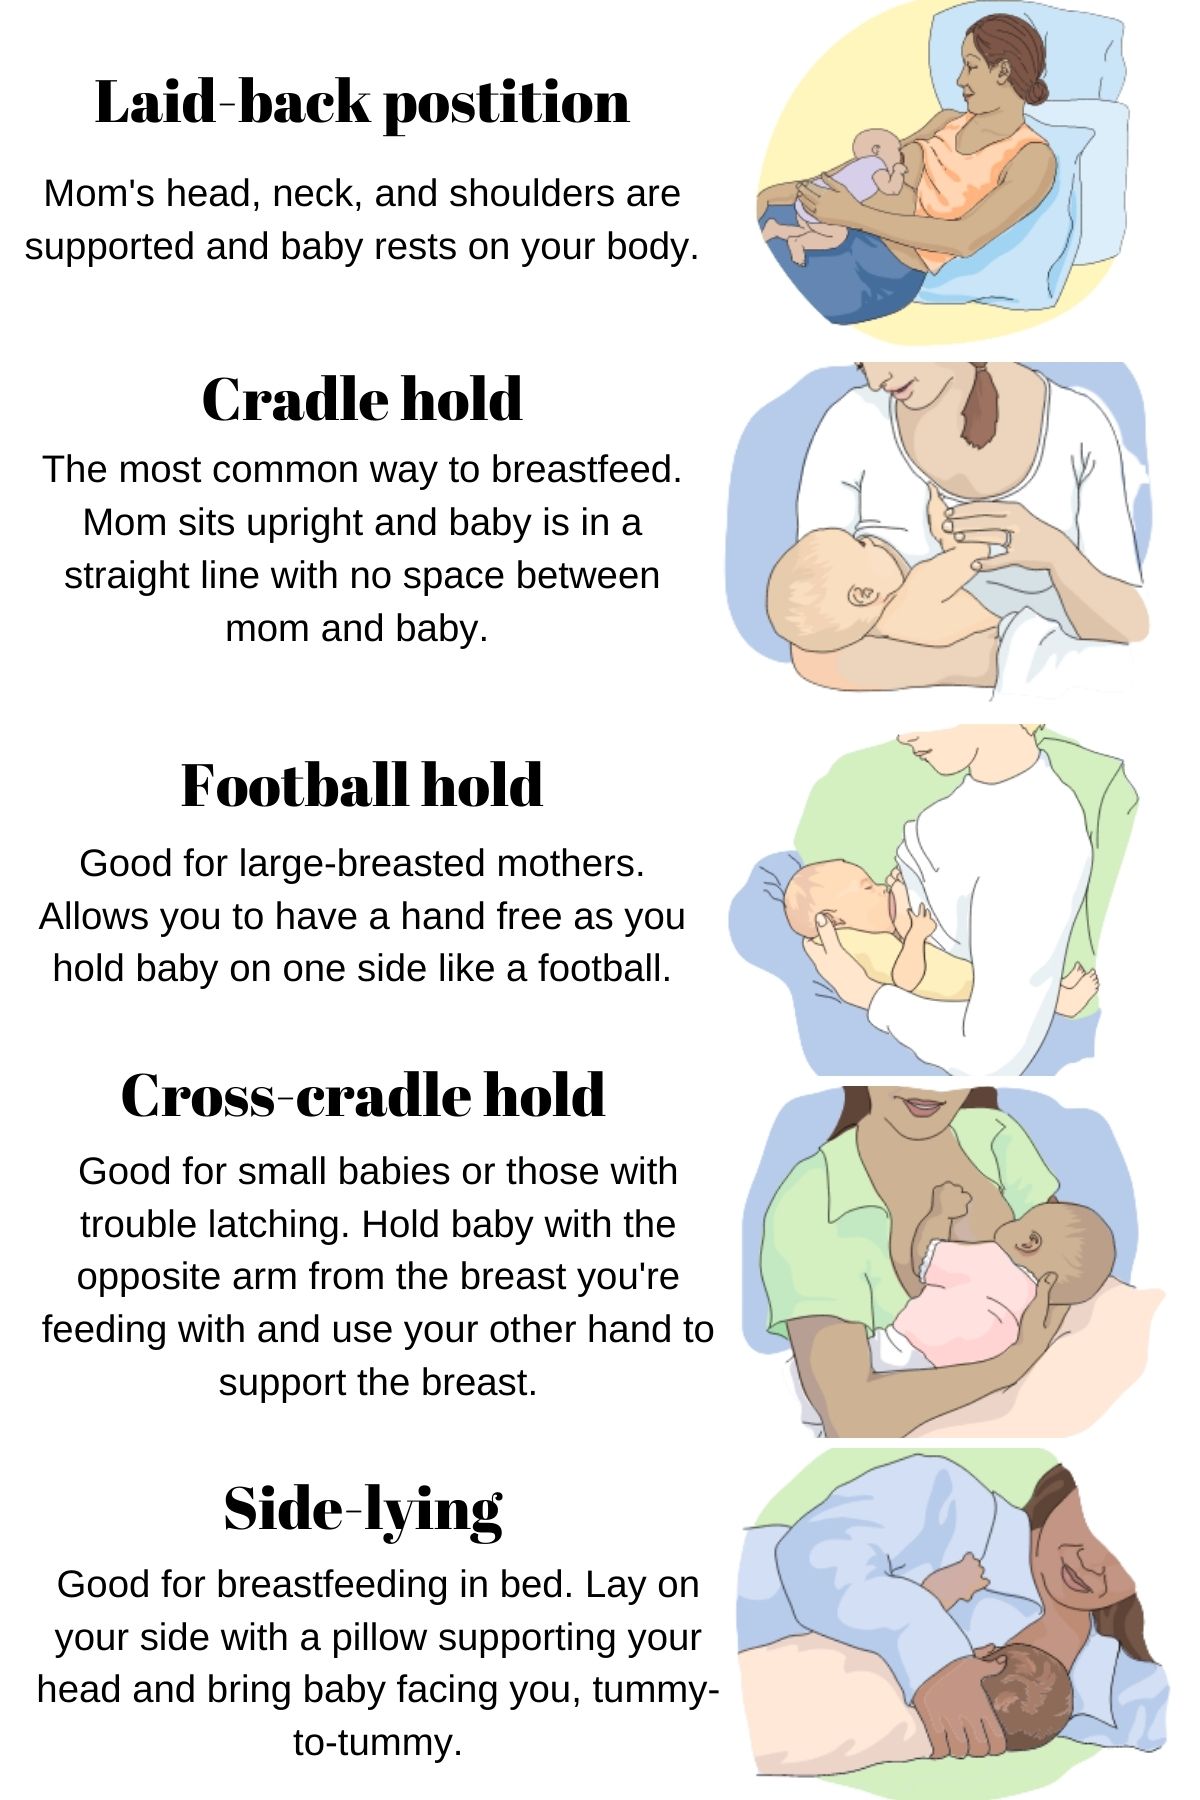 Graphic describing different breastfeeding positions including cradle hold, football hold, and side lying.